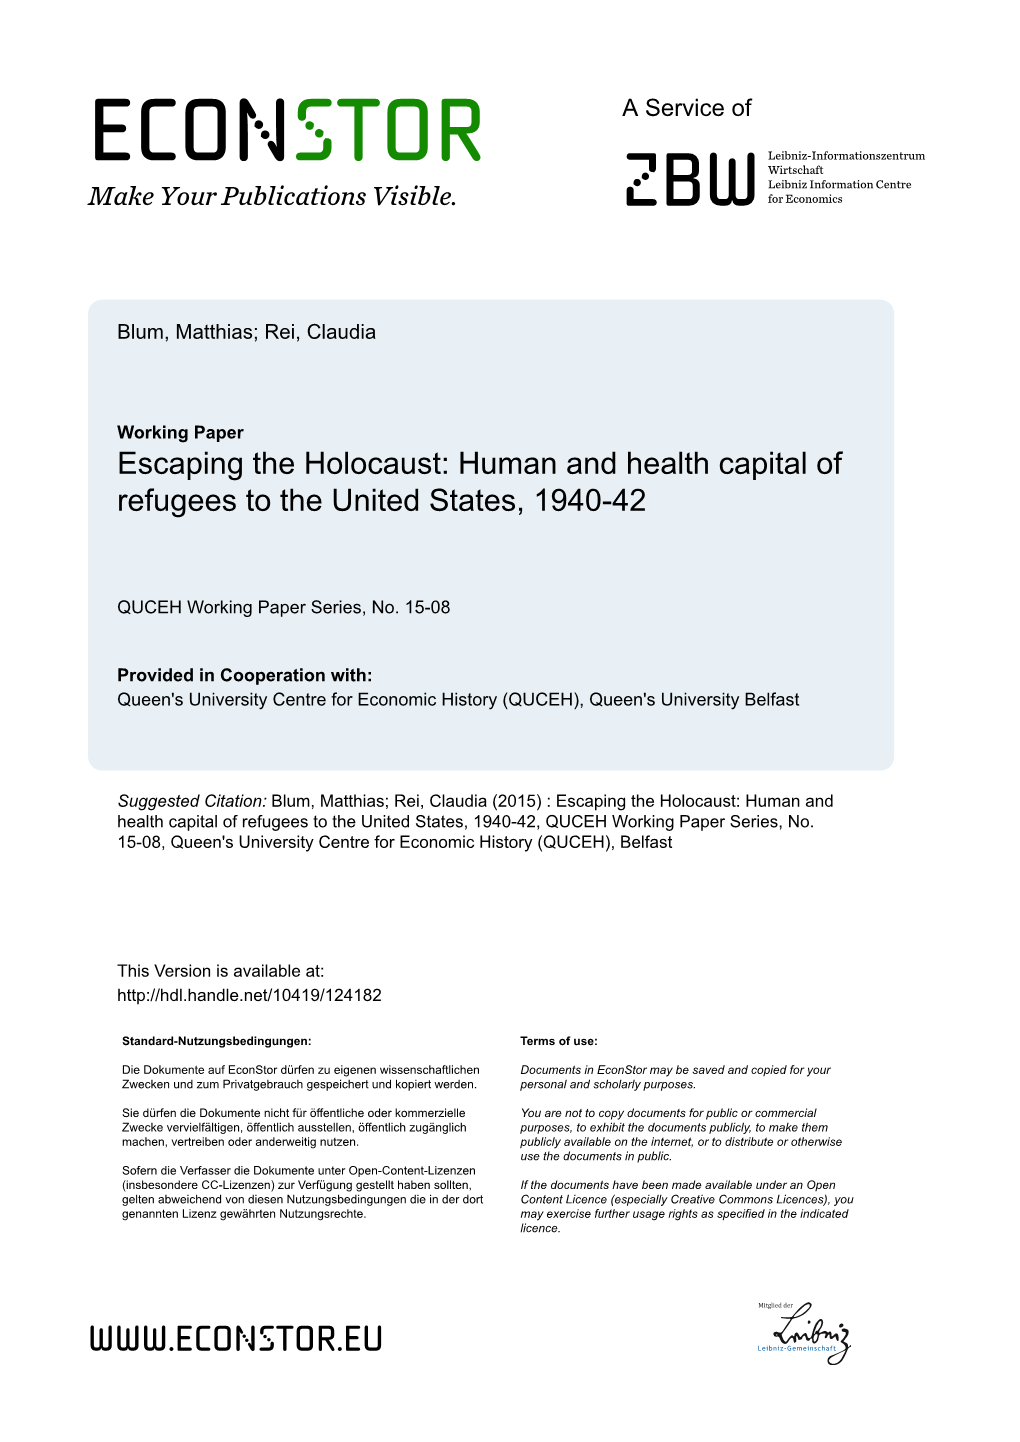 Escaping the Holocaust: Human and Health Capital of Refugees to the United States, 1940-42